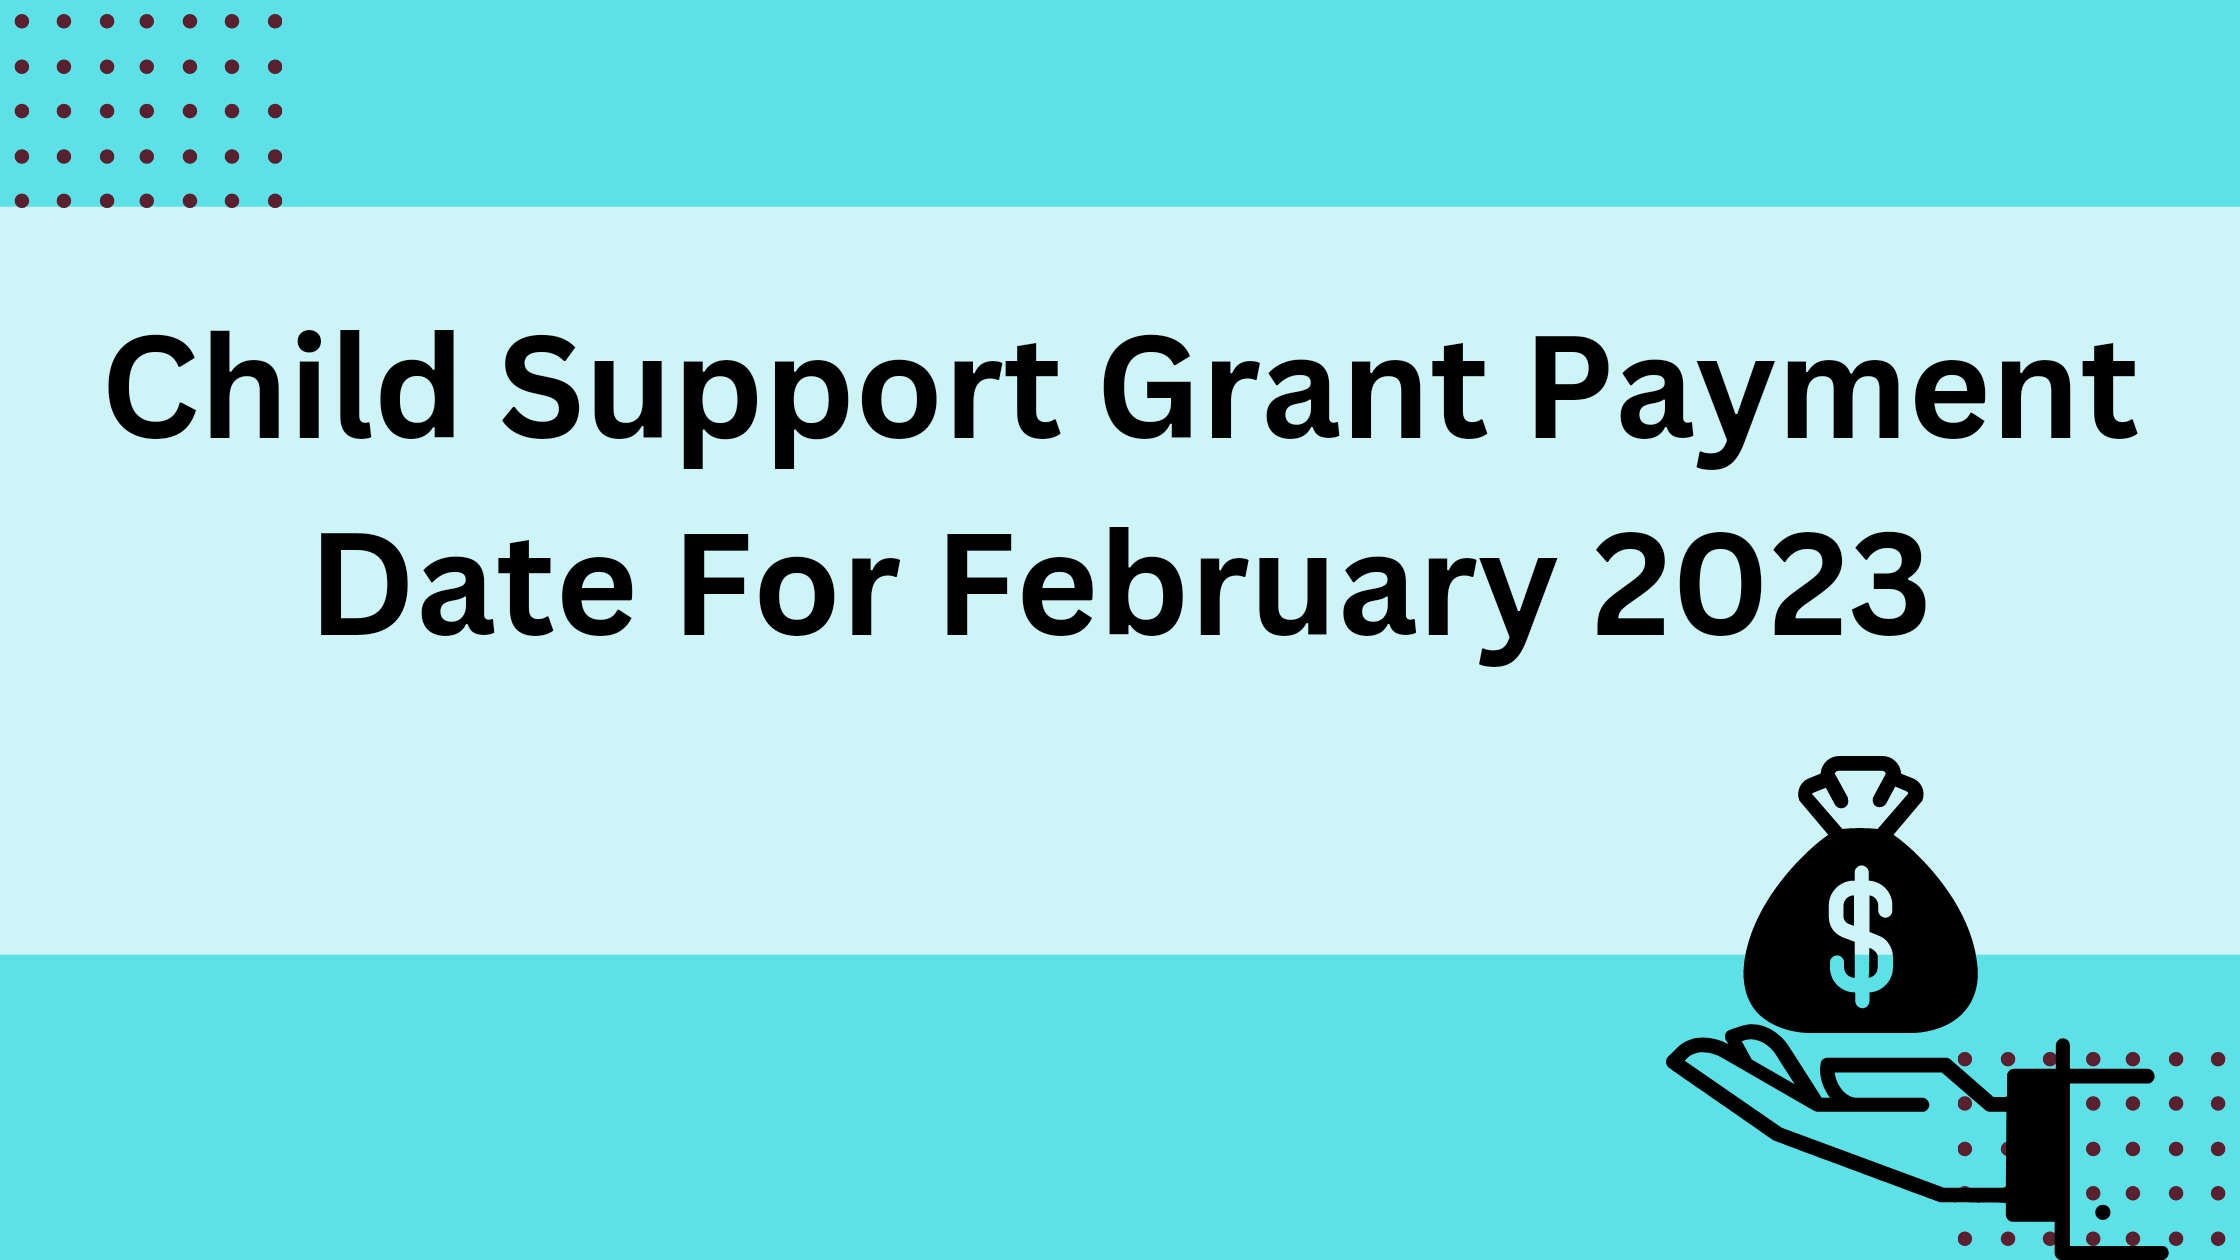 Child Support Grant Payment Date For February 2023